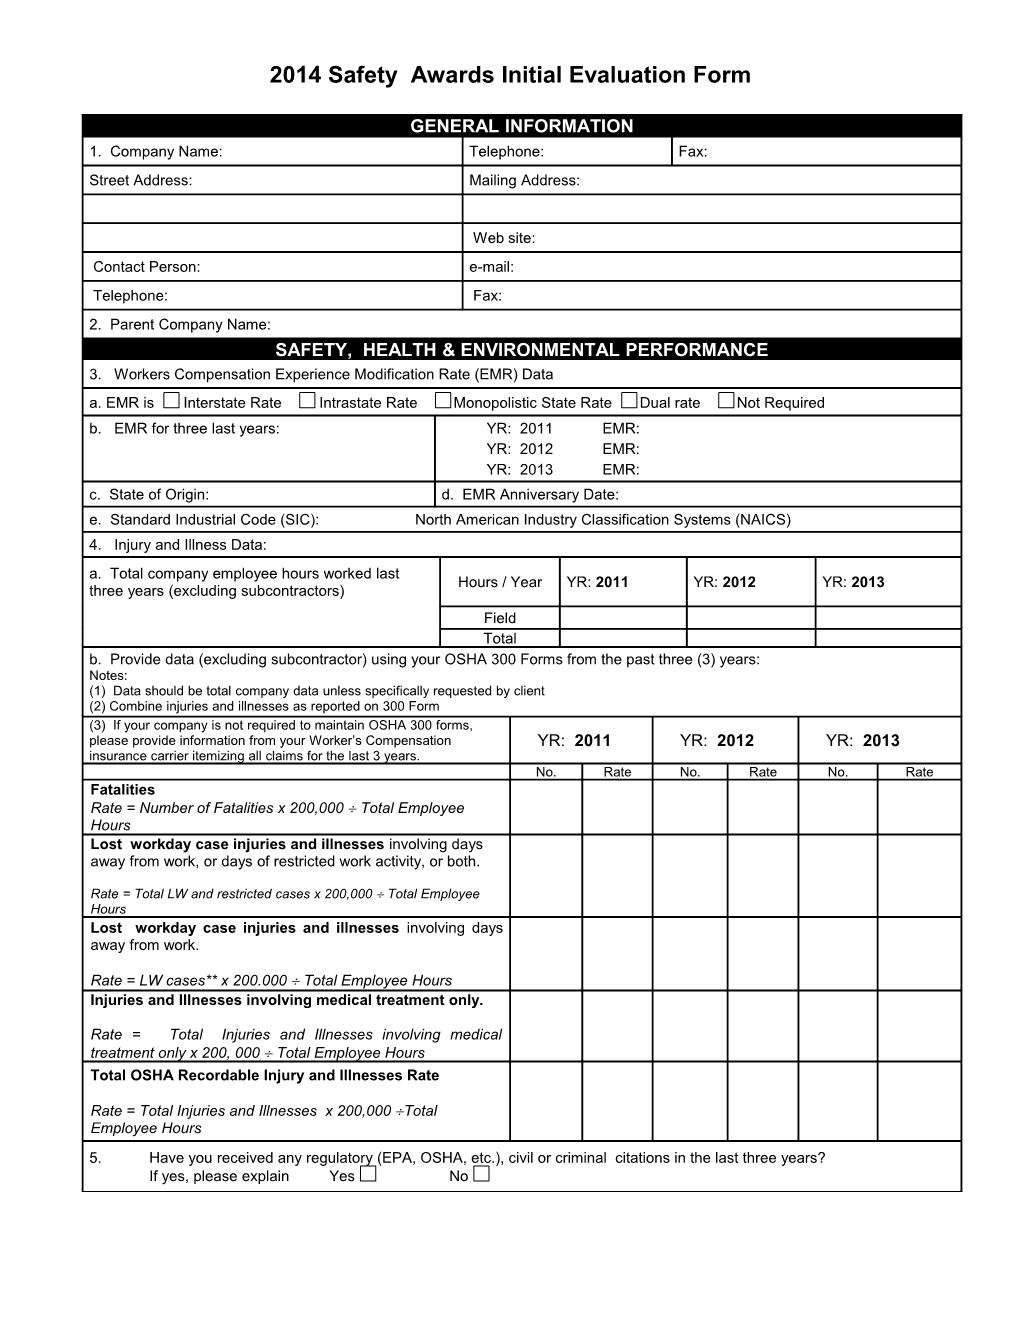 2014 Safety Awards Initial Evaluation Form